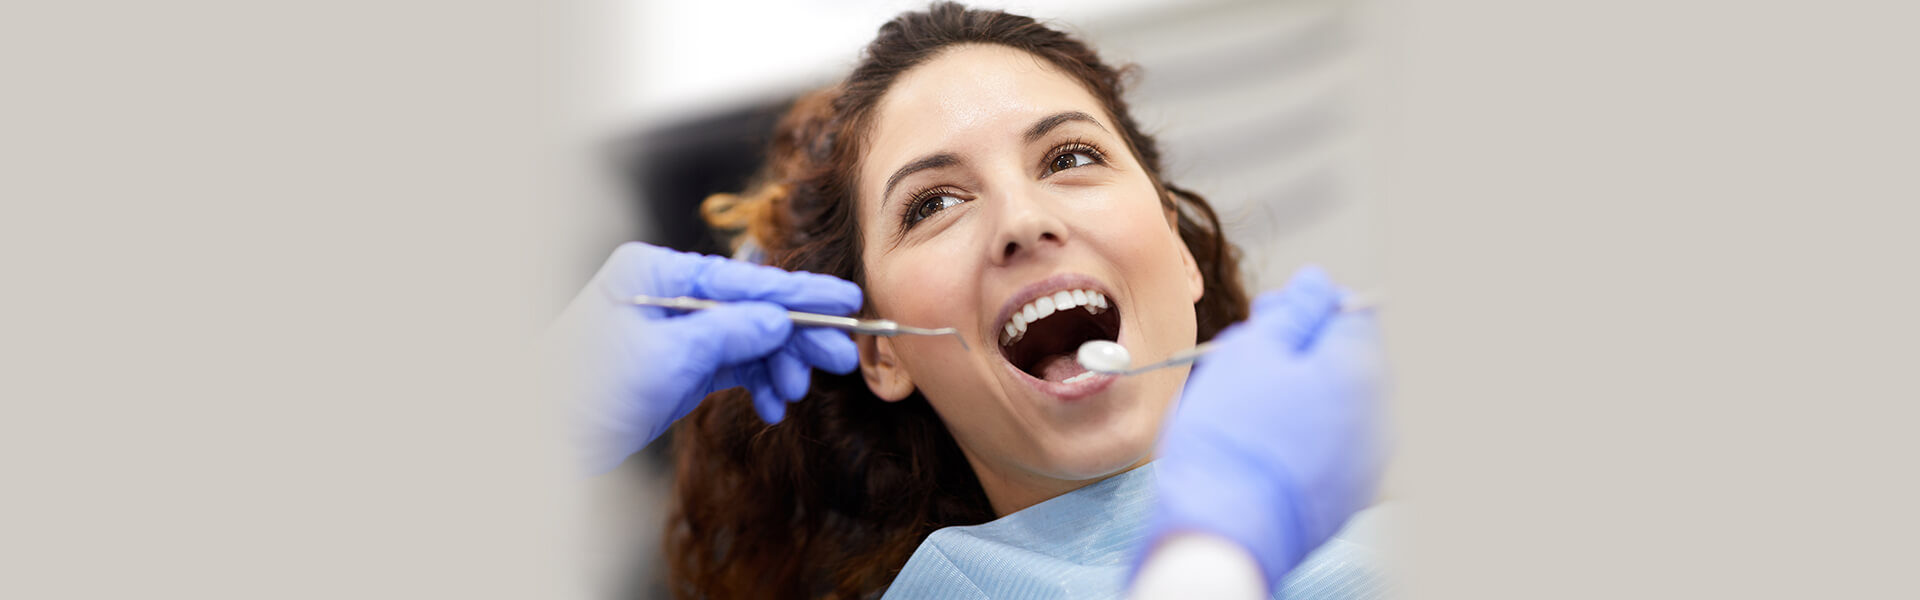 Dental Exams & Cleanings in Dover, NH